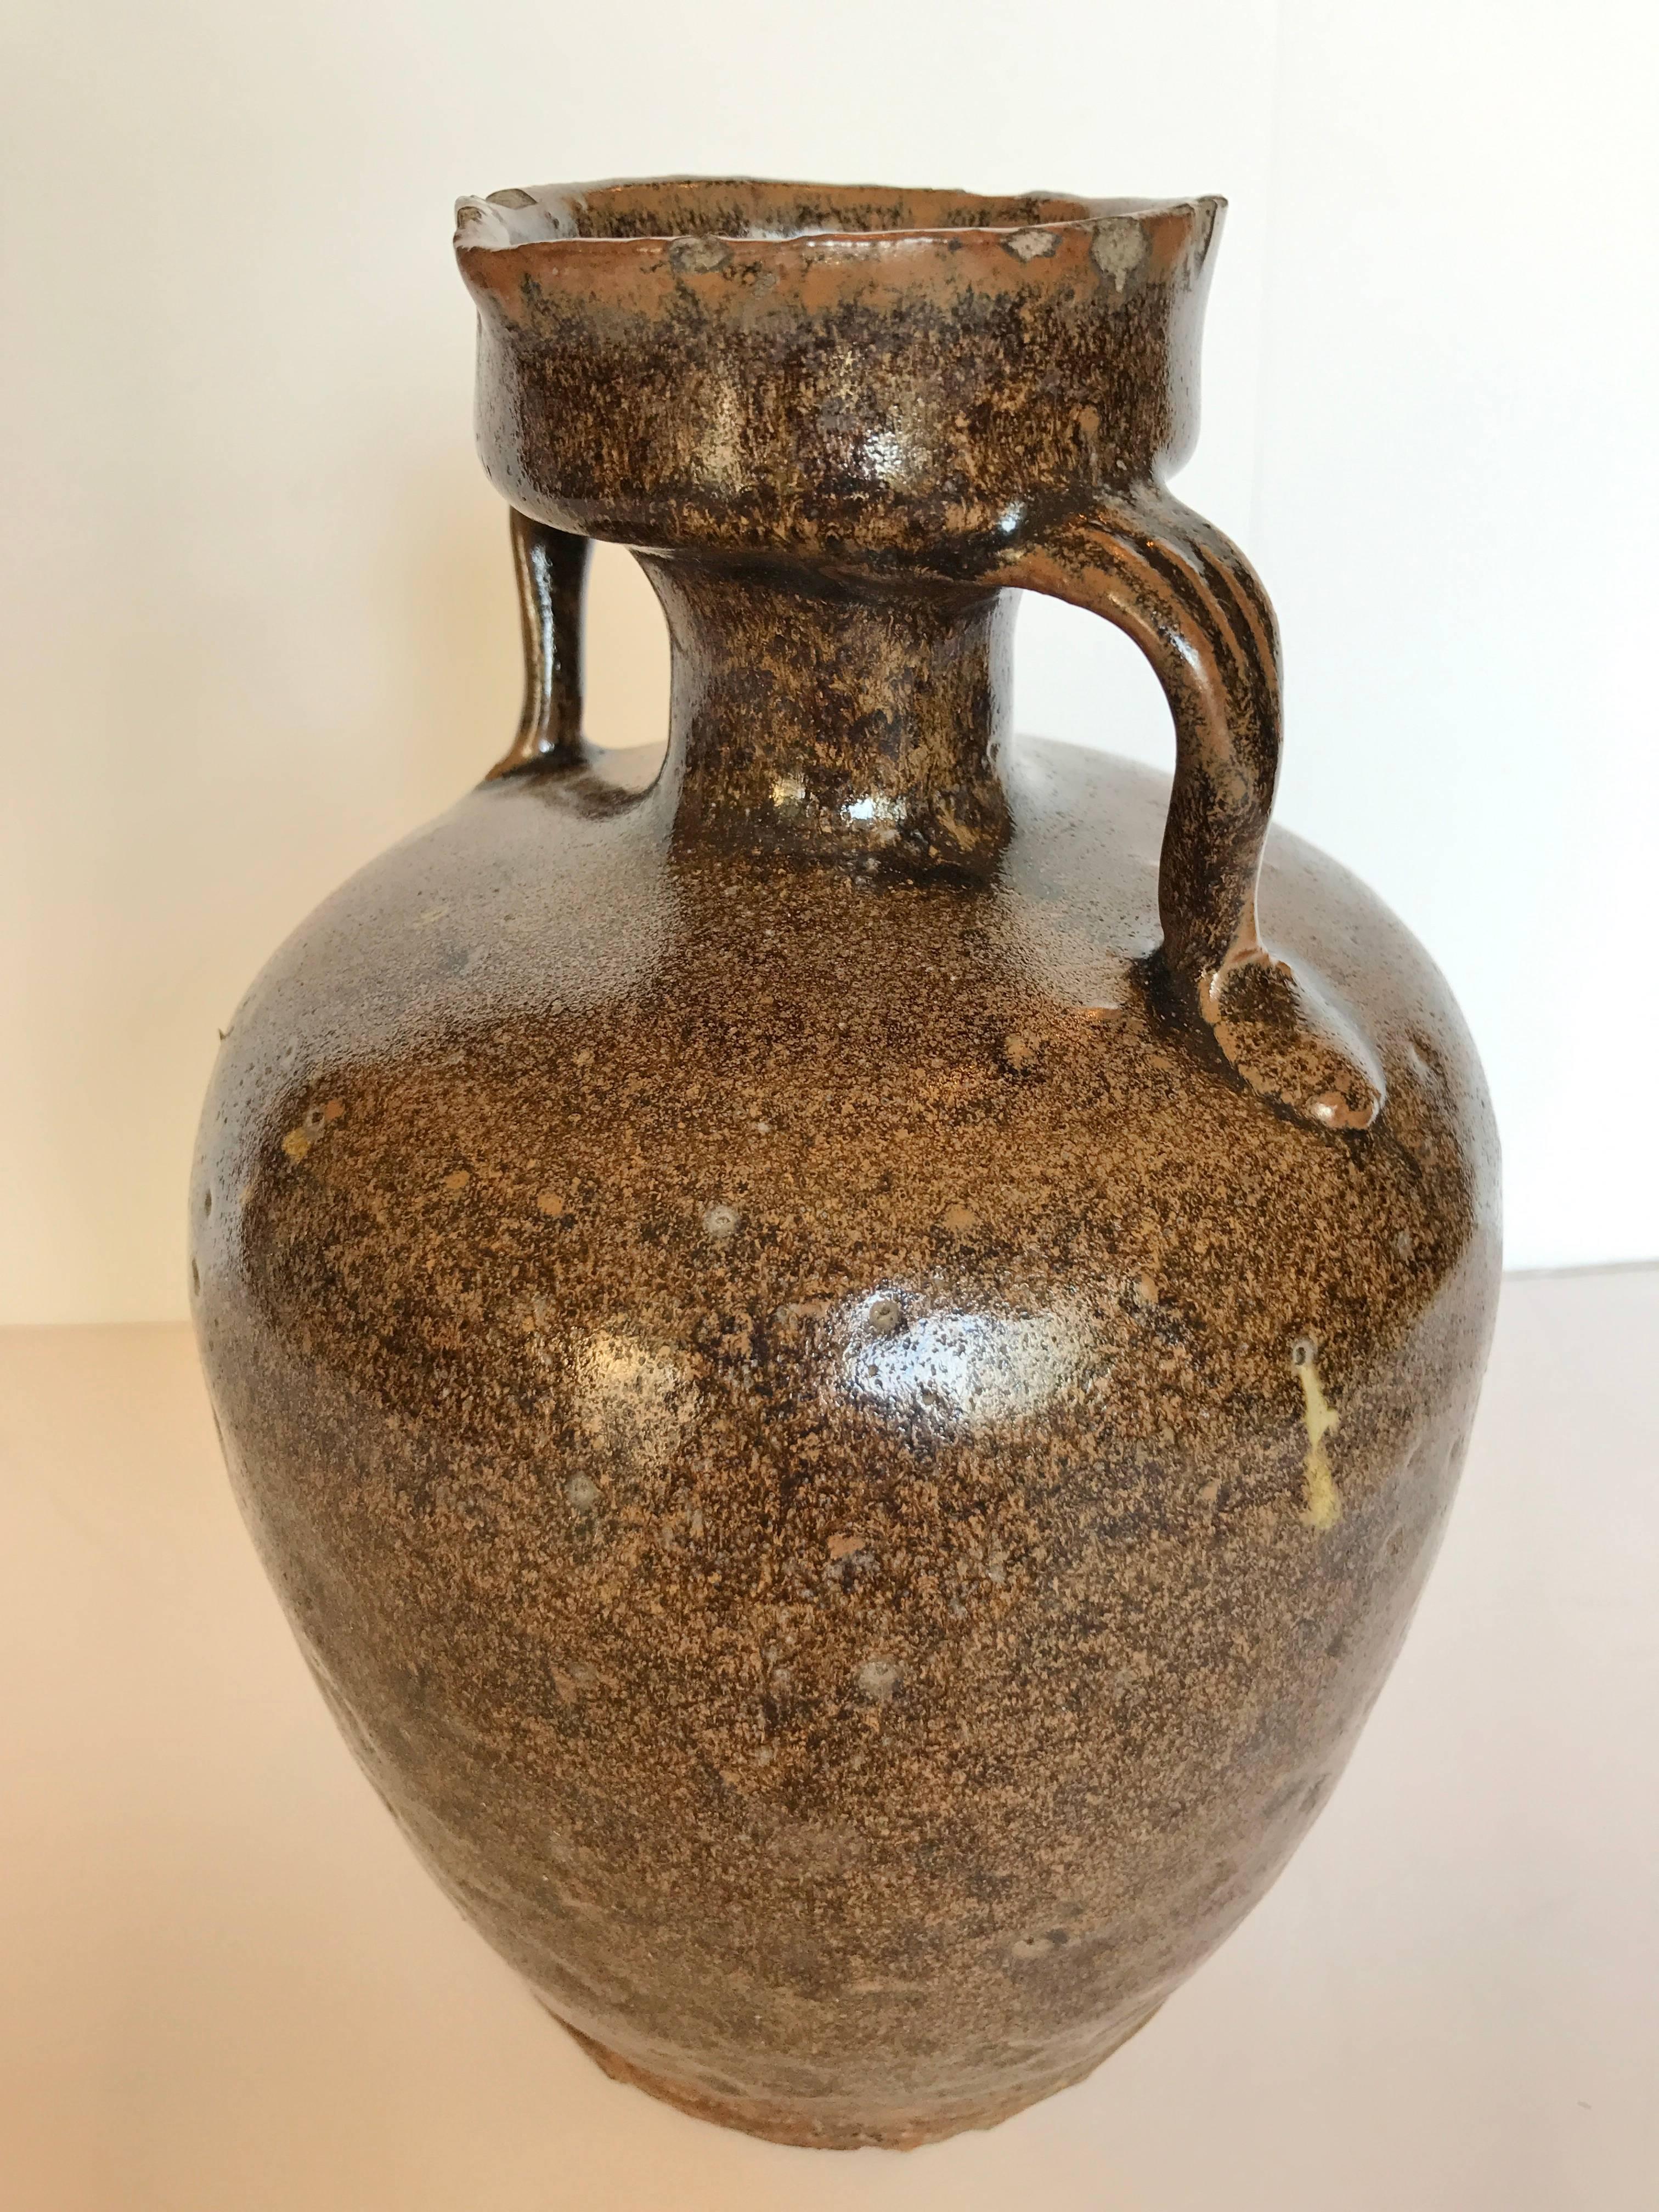 Antique Chinese pottery wine glaze with beautiful glaze. Minimal flaking around spout but considering it'age it is in very good condition. It would have been used to store wine for Chinese household.